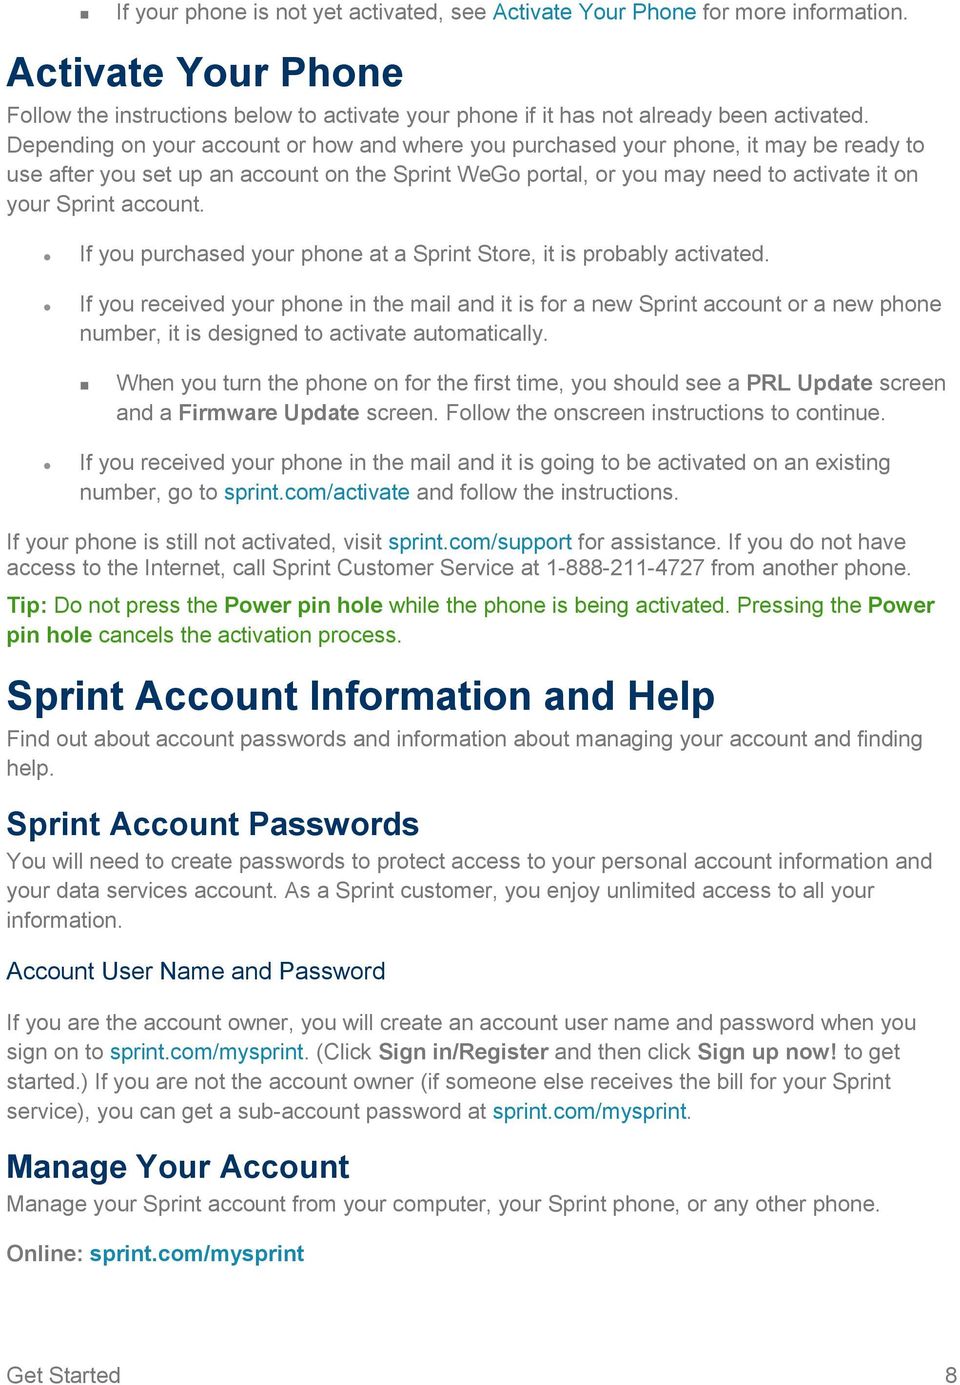 account. If you purchased your phone at a Sprint Store, it is probably activated.